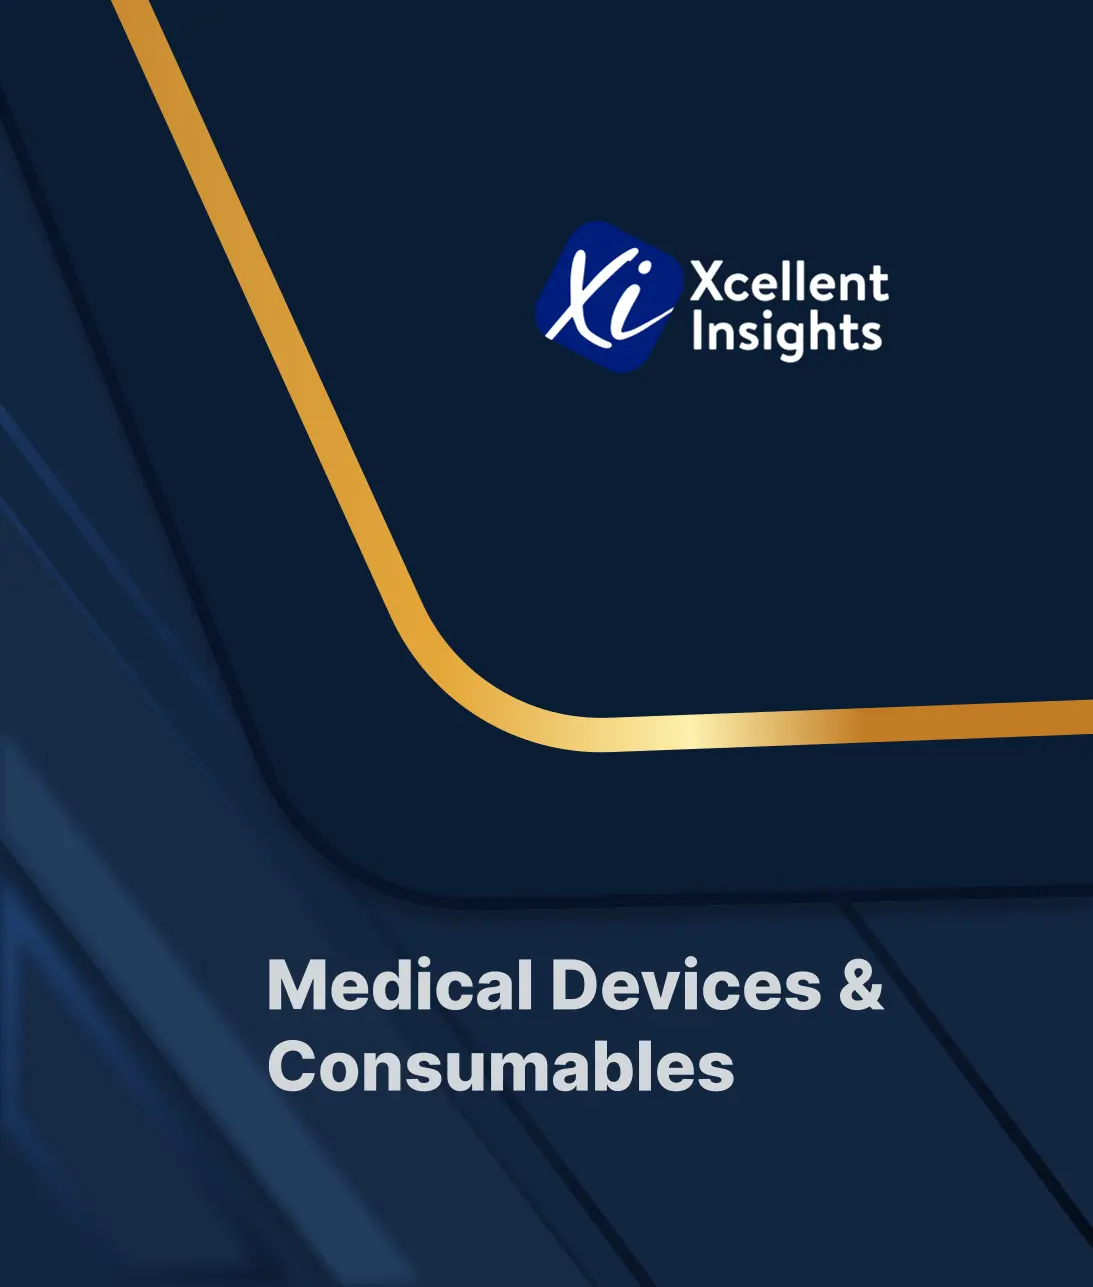 Medical Devices & Consumables